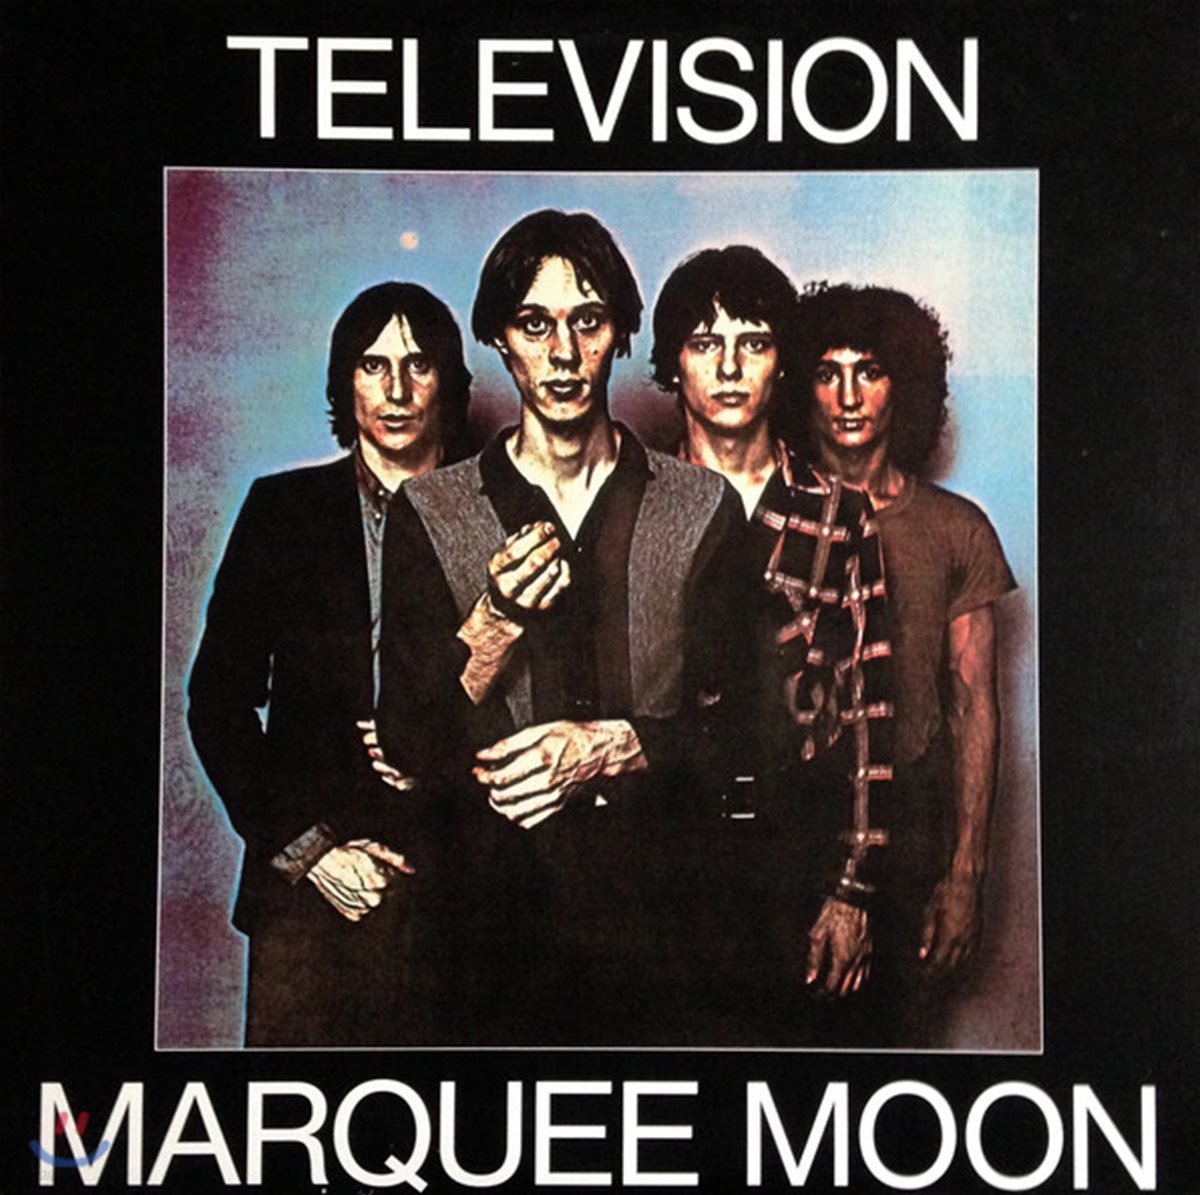 Television - Marquee Moon [LP]